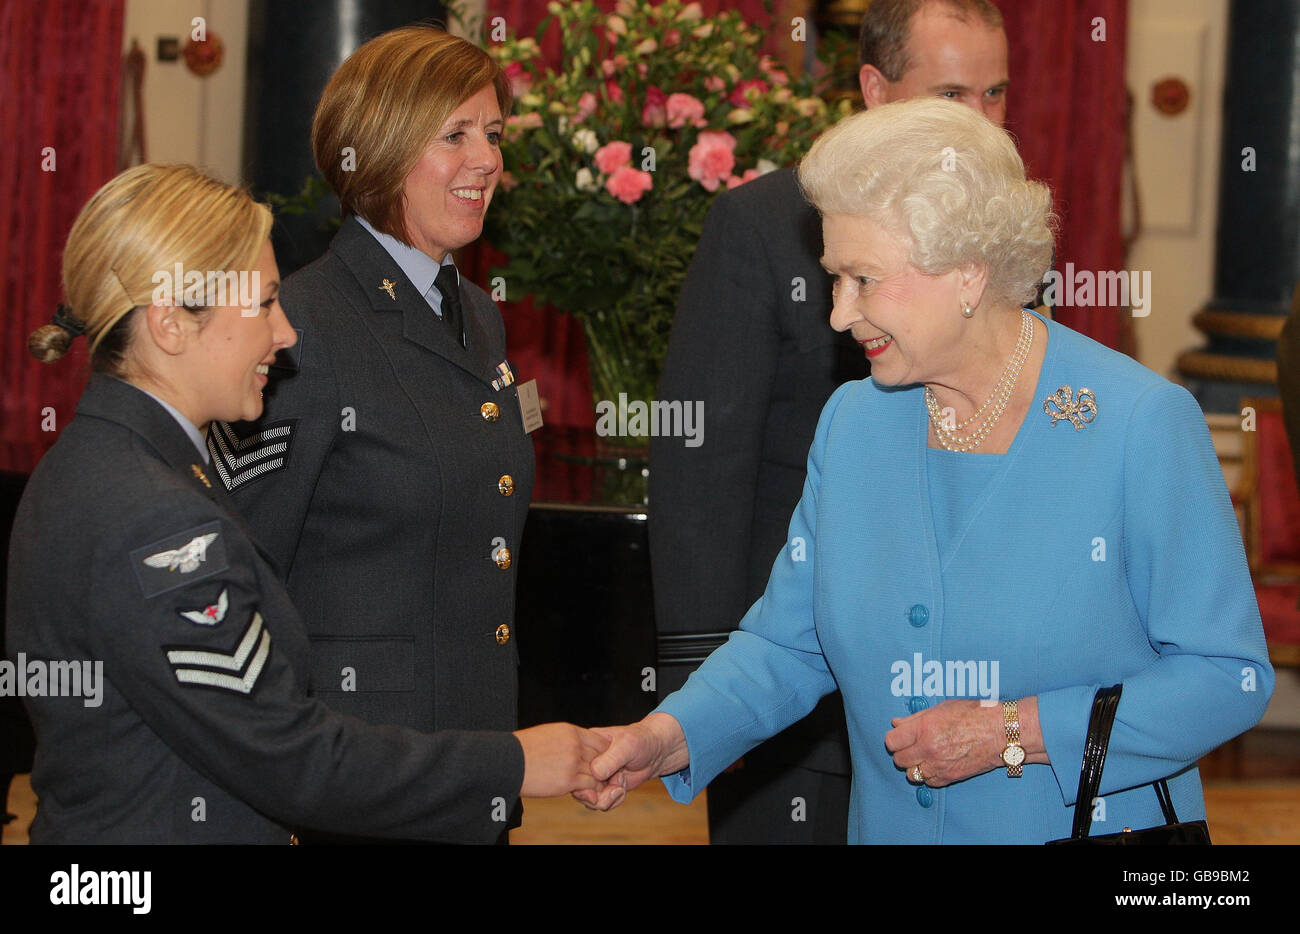 Britain's Queen Elizabeth II talks to (left to right) Corporal Audrey McKenna from the RAF Paramedic Deployable Aeromedical Response Team, and Flight Sergeant Karen McNeill, Flight Nurse in the RAF Aeromedical Evacuation Squadron, during a reception at Buckingham Palace in London, for people working in Healthcare in the UK. Stock Photo